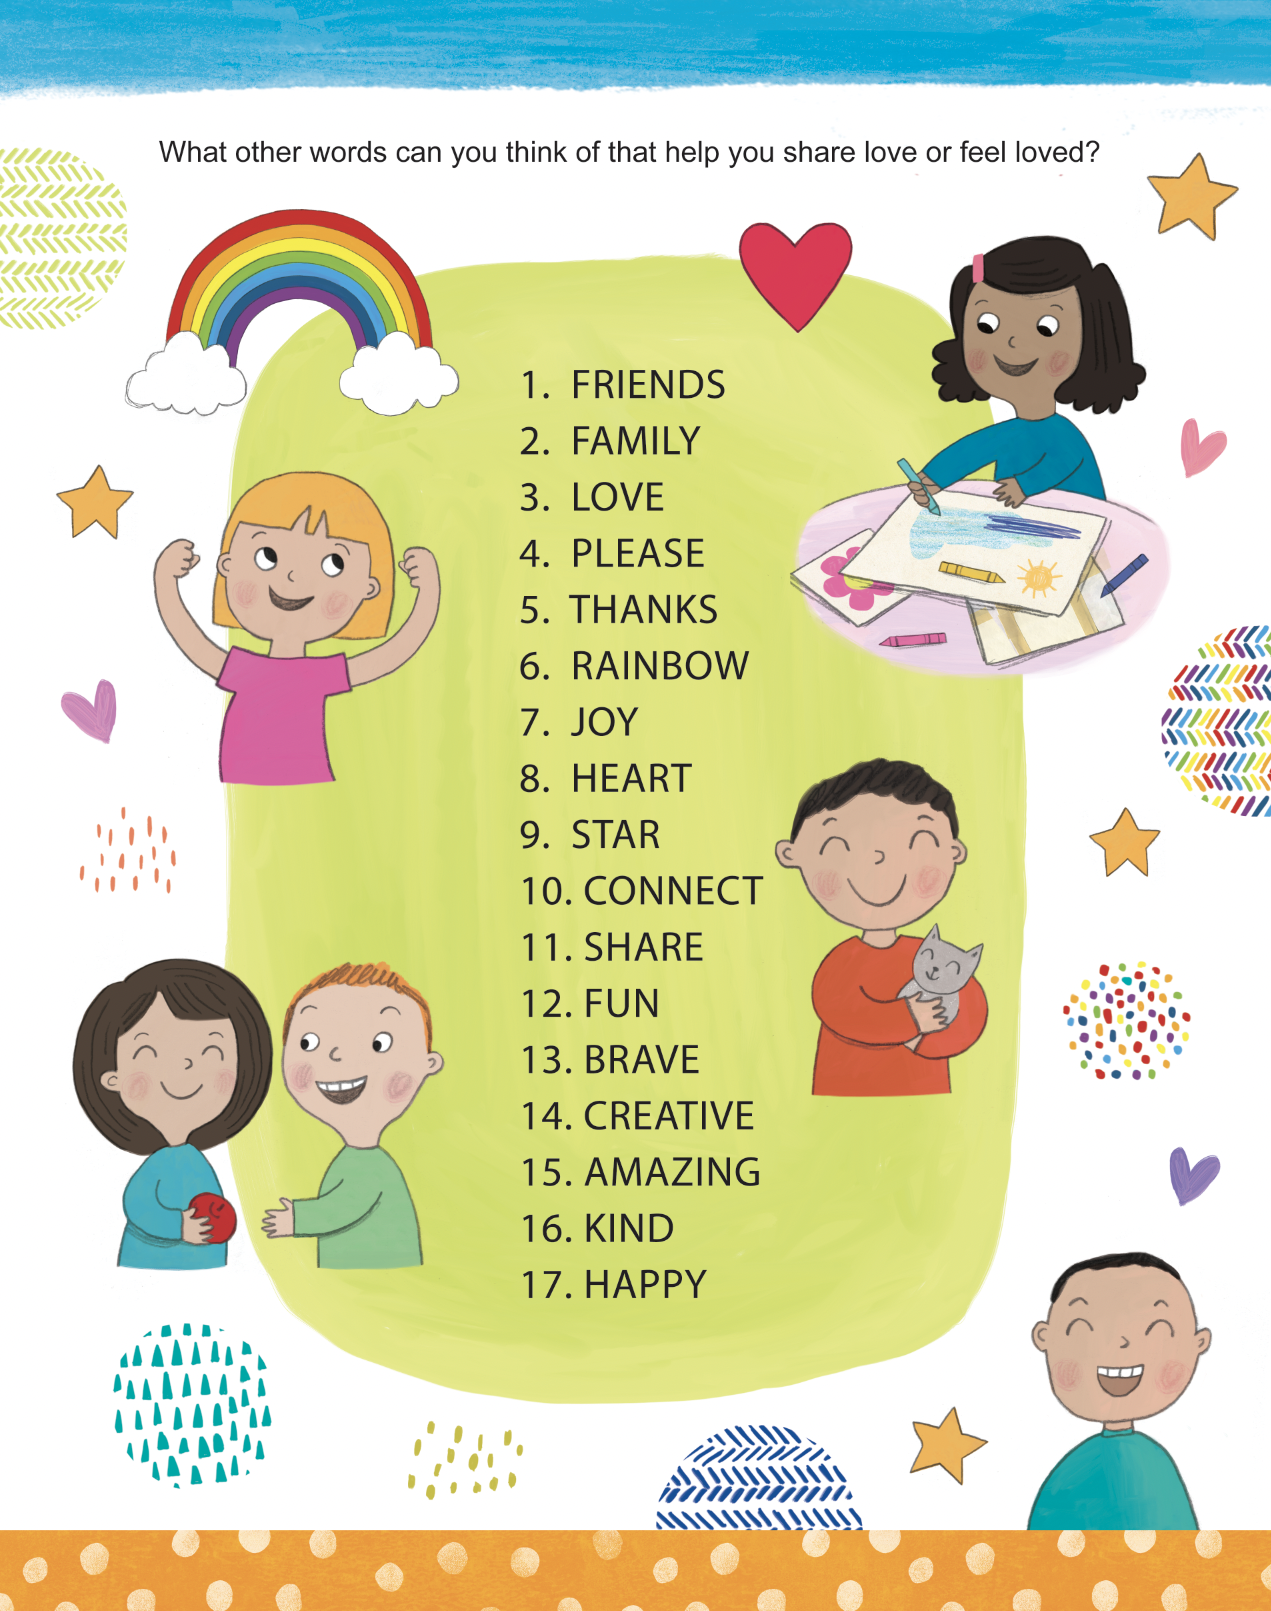 ILoveYouNearAndFar-activity-book-by-Bloomsbury-kids-share-and-feel-love-word-game-by-Lesley-Breen.png